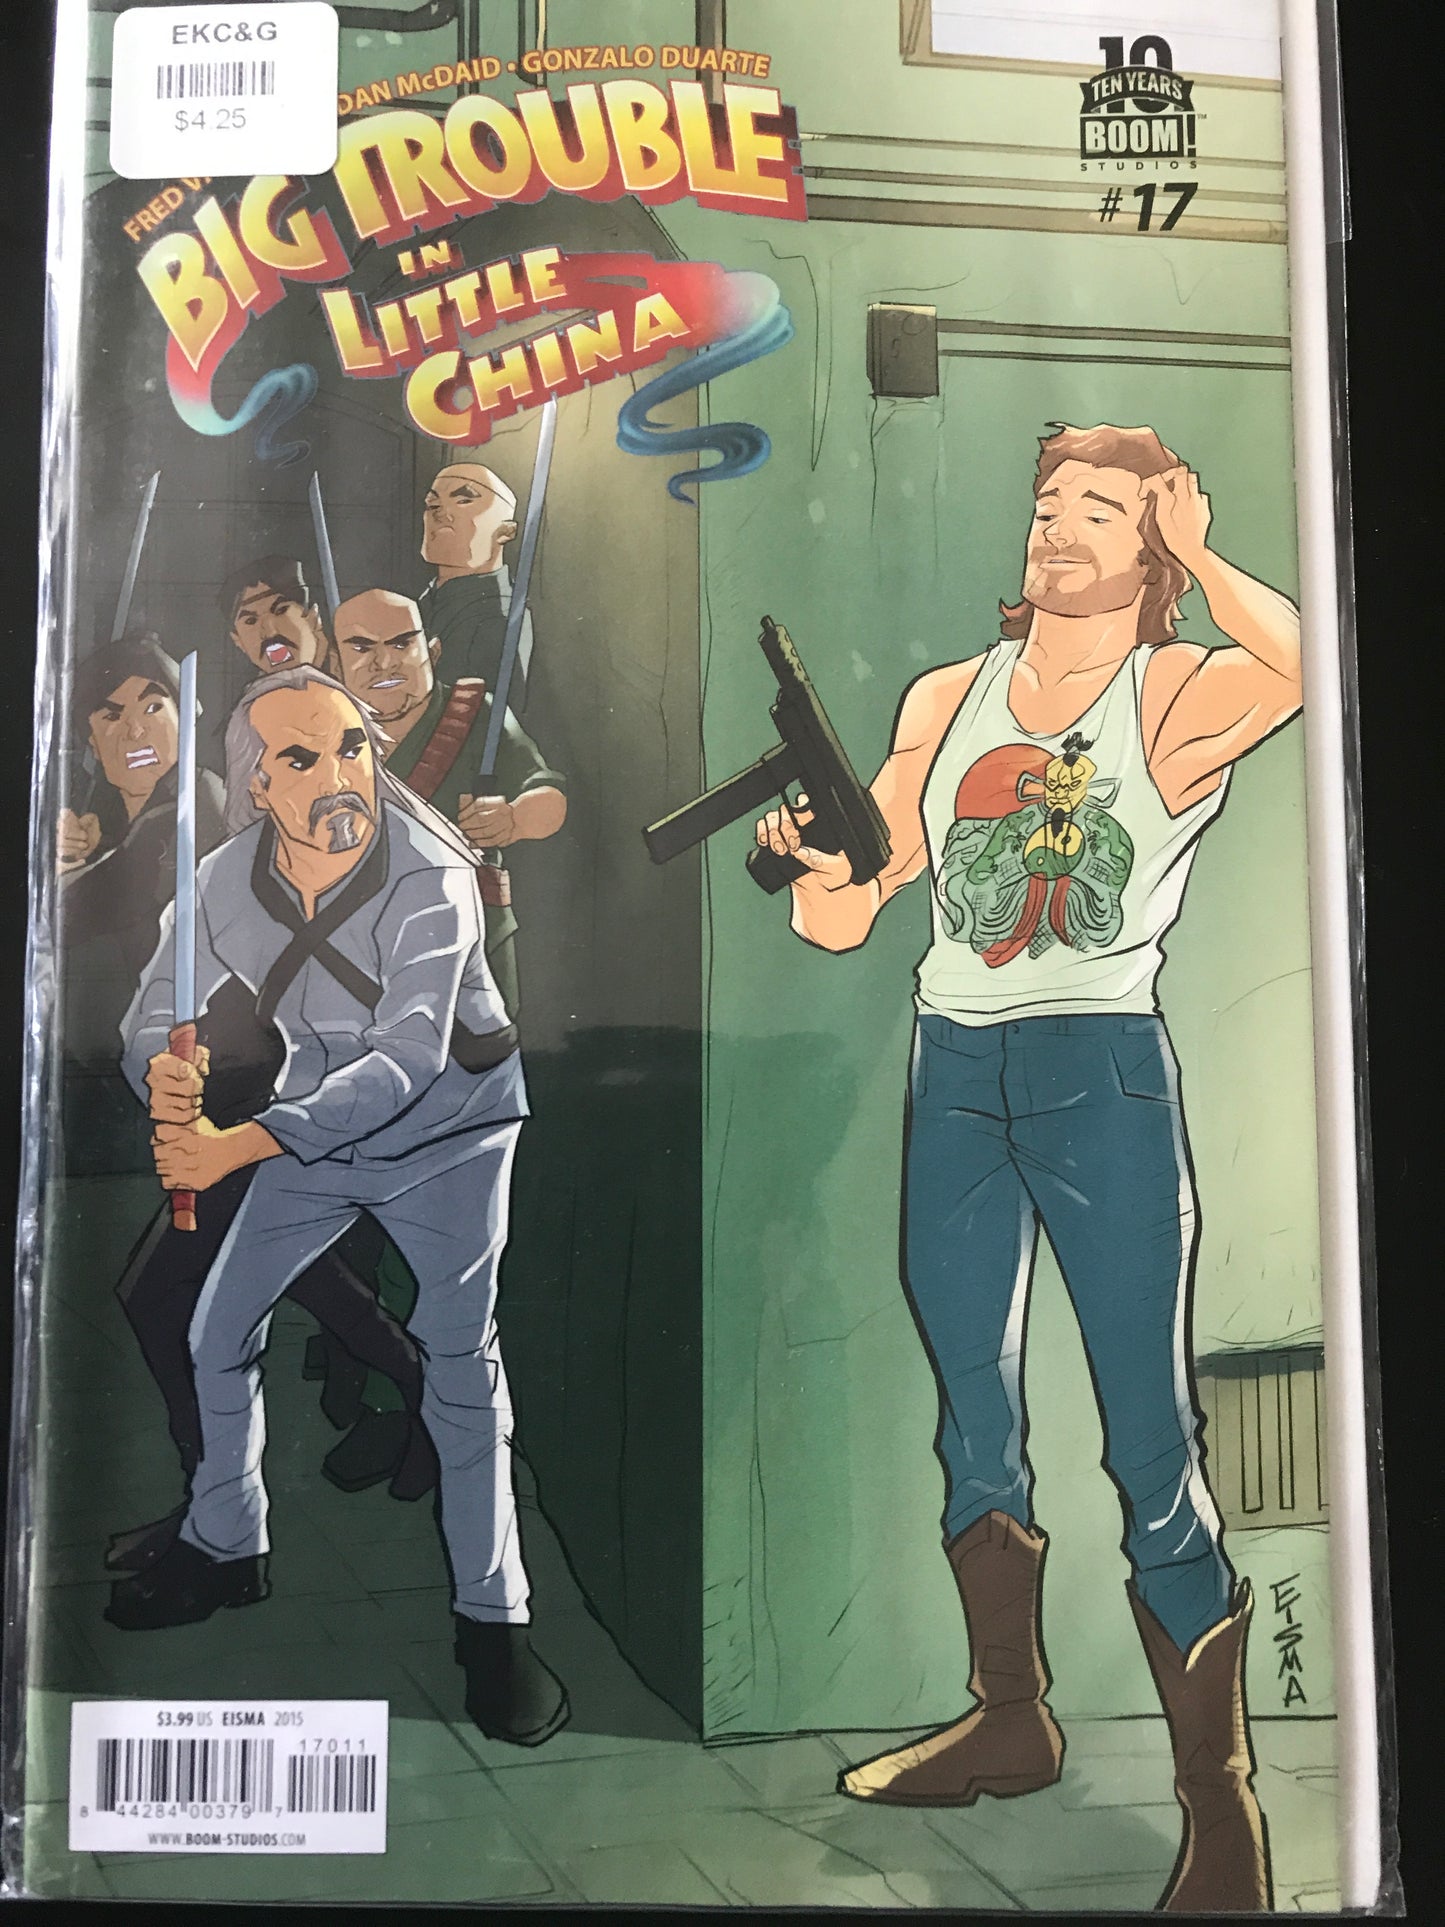 Big Trouble in Little China (2014 Boom) #17A